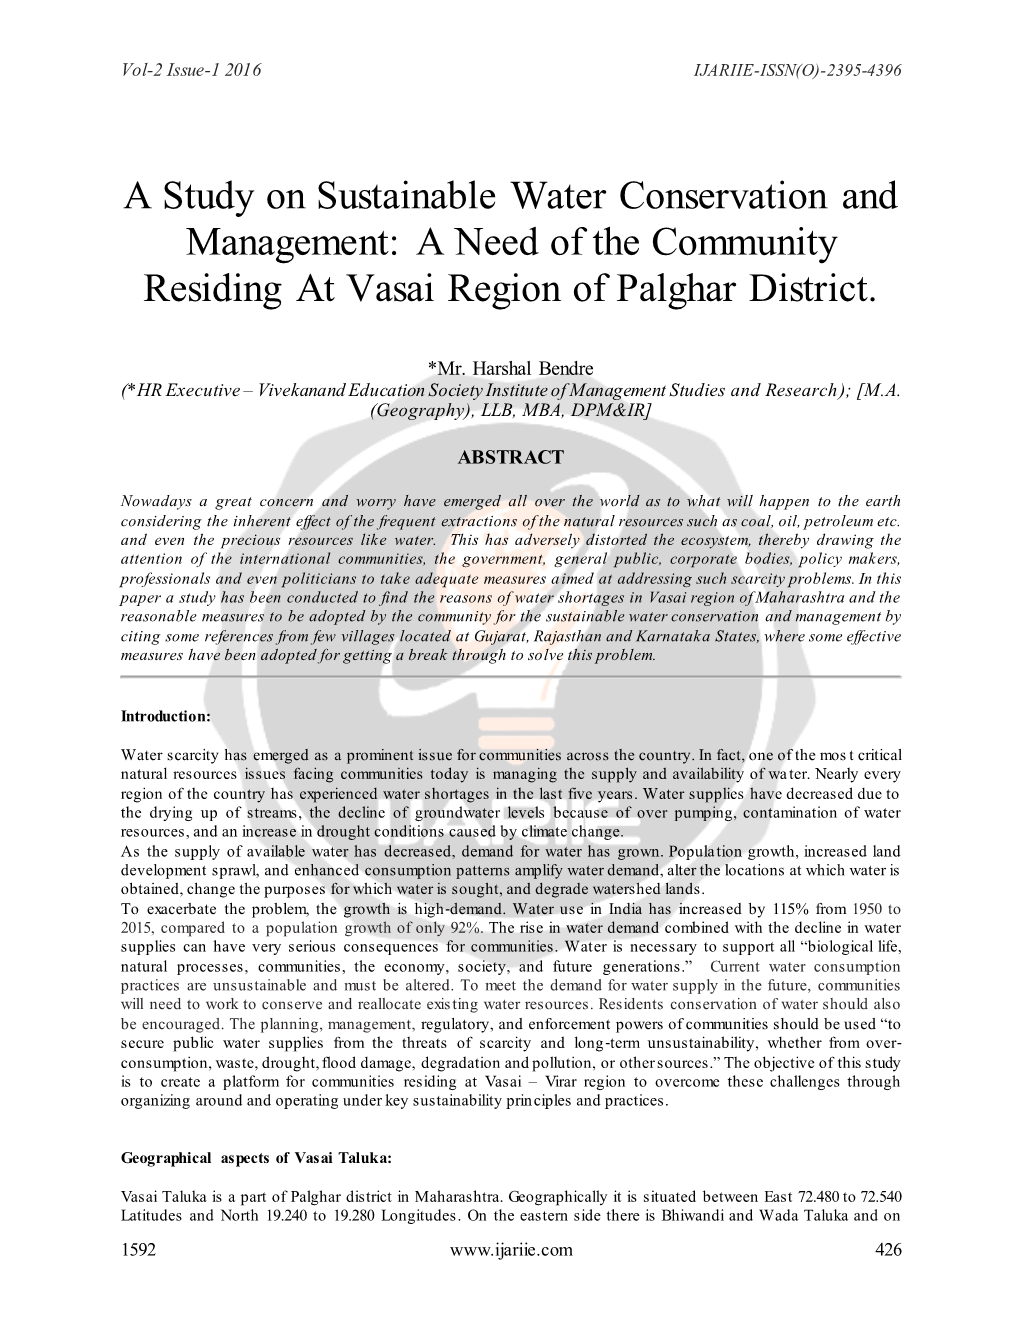 A Study on Sustainable Water Conservation and Management: a Need of the Community Residing at Vasai Region of Palghar District